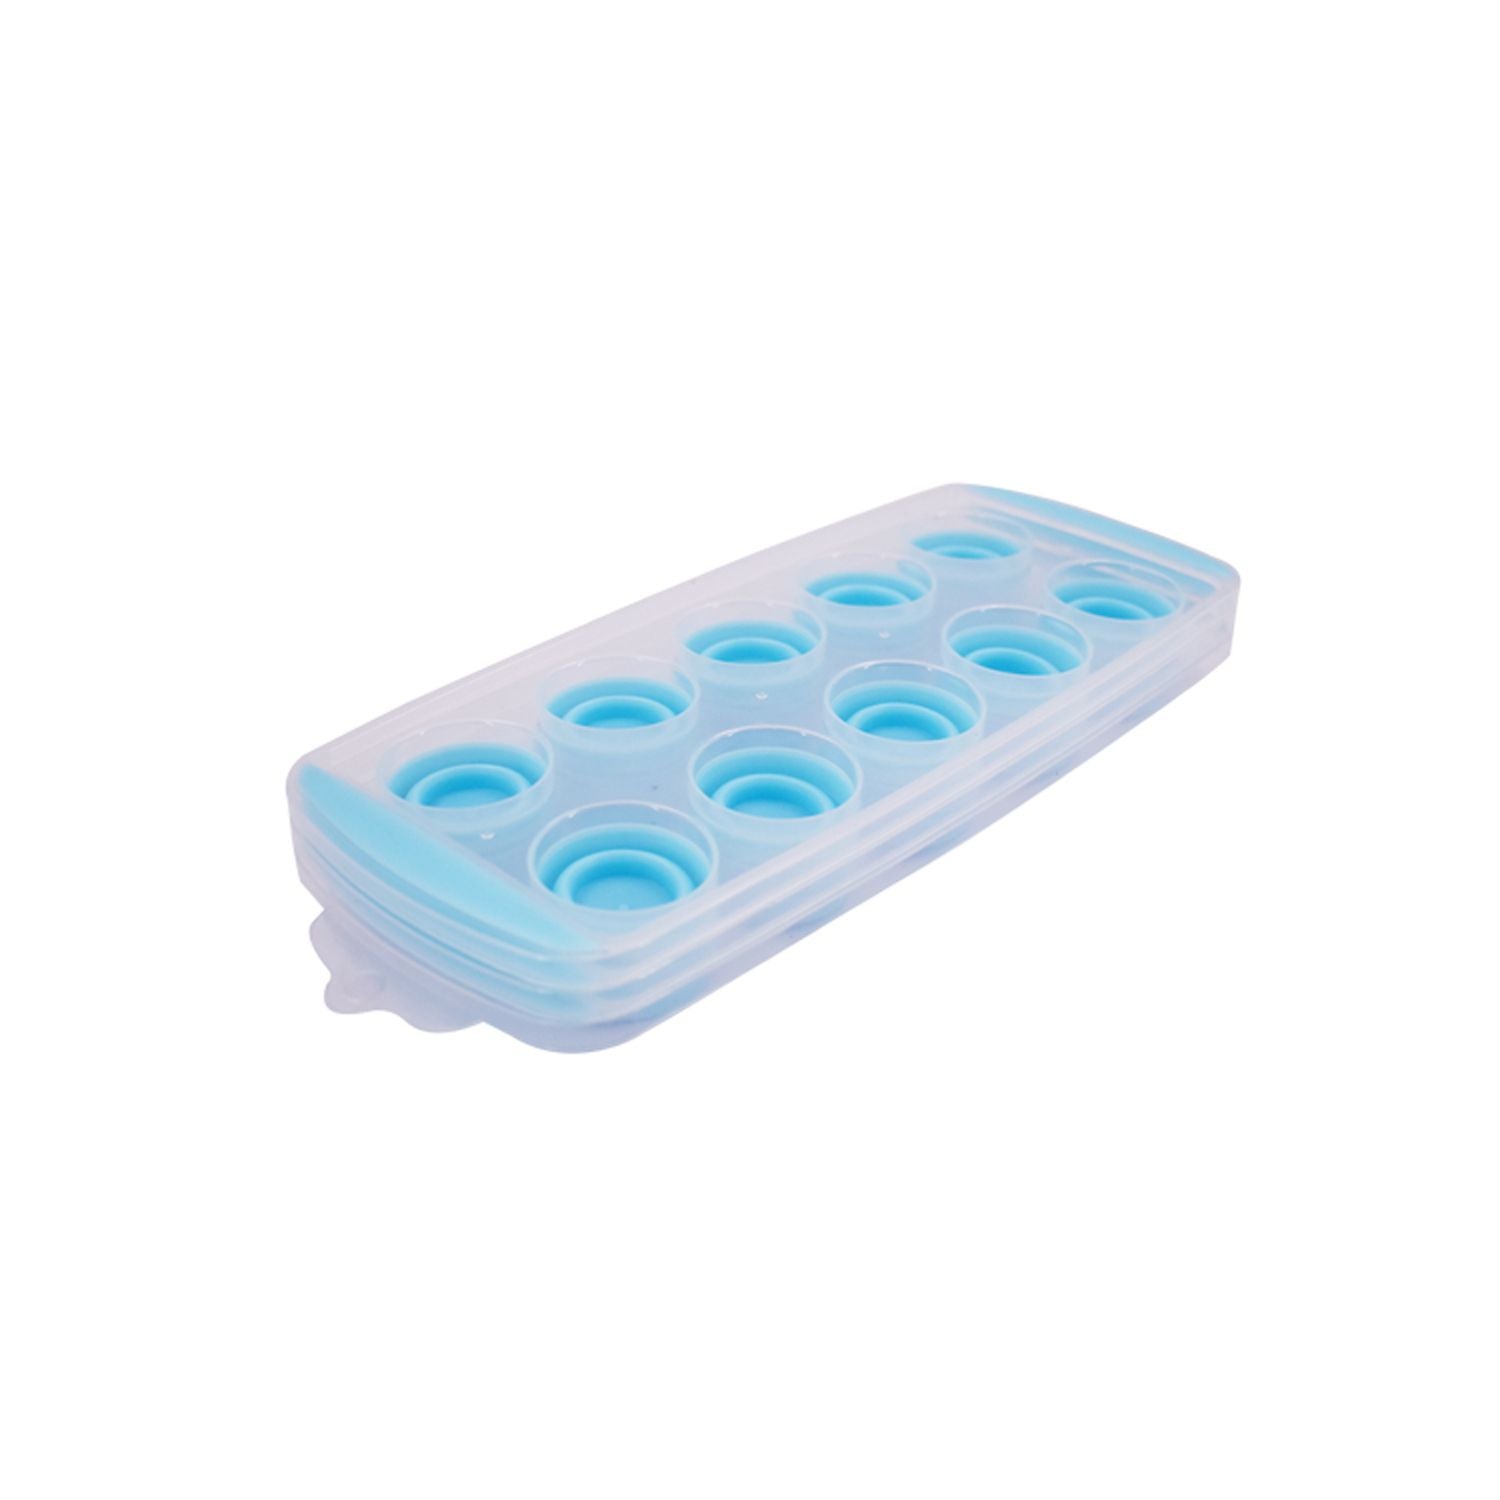 Flexible Silicone Ice Cube Tray 10 cubes, (Pack of 3) (P8002-3P-A)